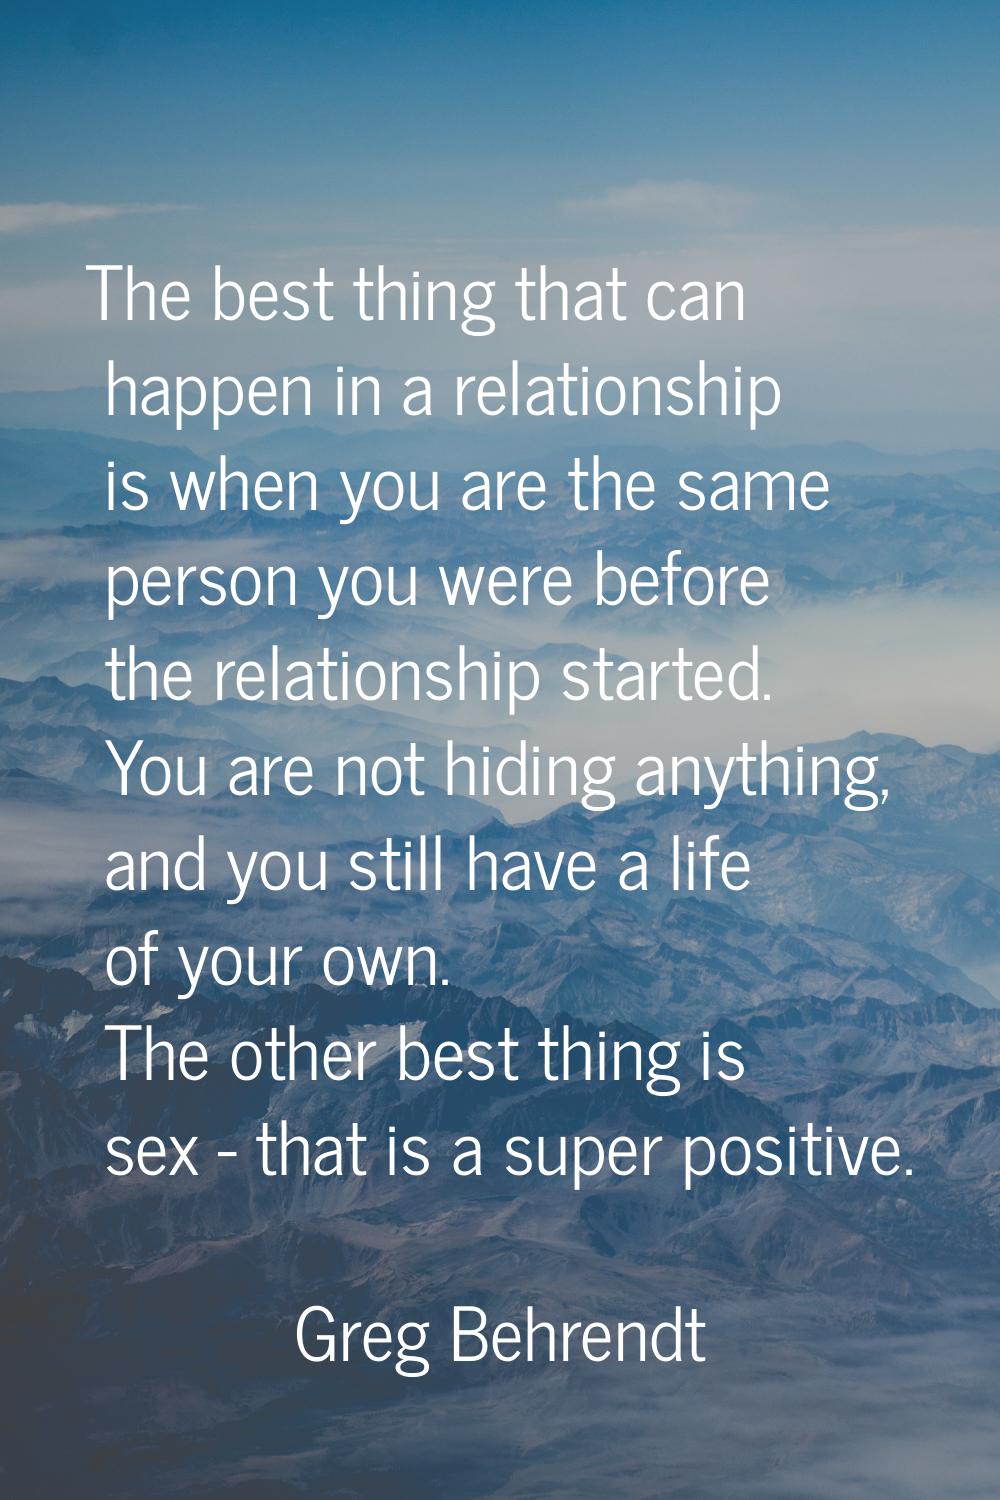 The best thing that can happen in a relationship is when you are the same person you were before th